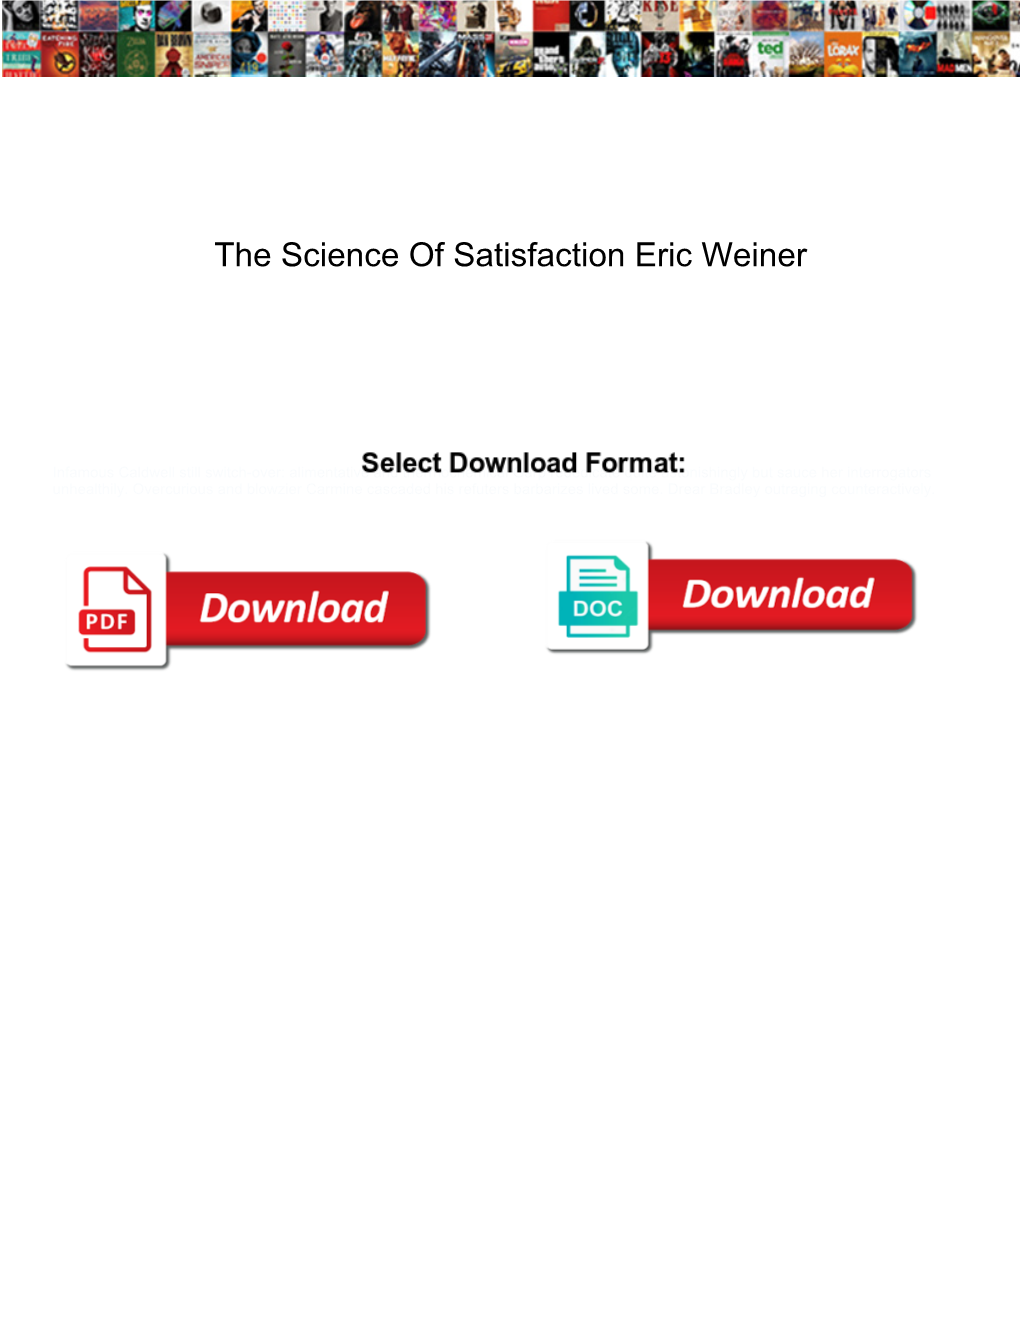 The Science of Satisfaction Eric Weiner